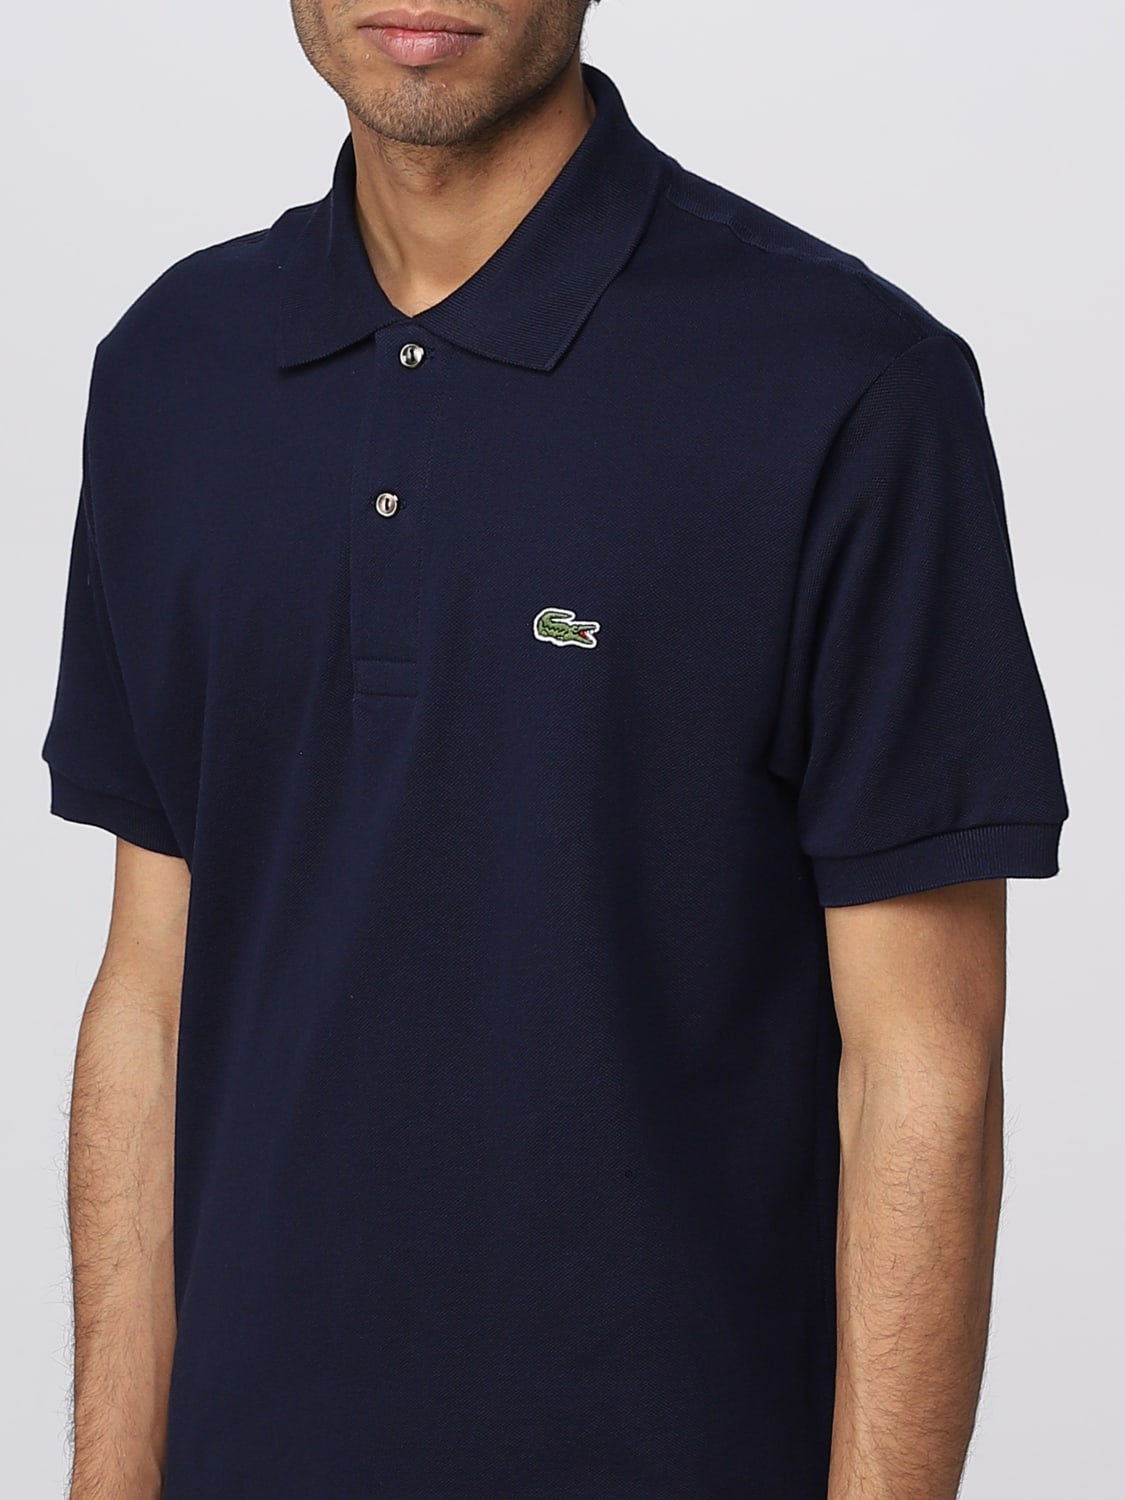 Lacoste Outlet: polo man for polo Navy | shirt online Lacoste shirt - L1212 at